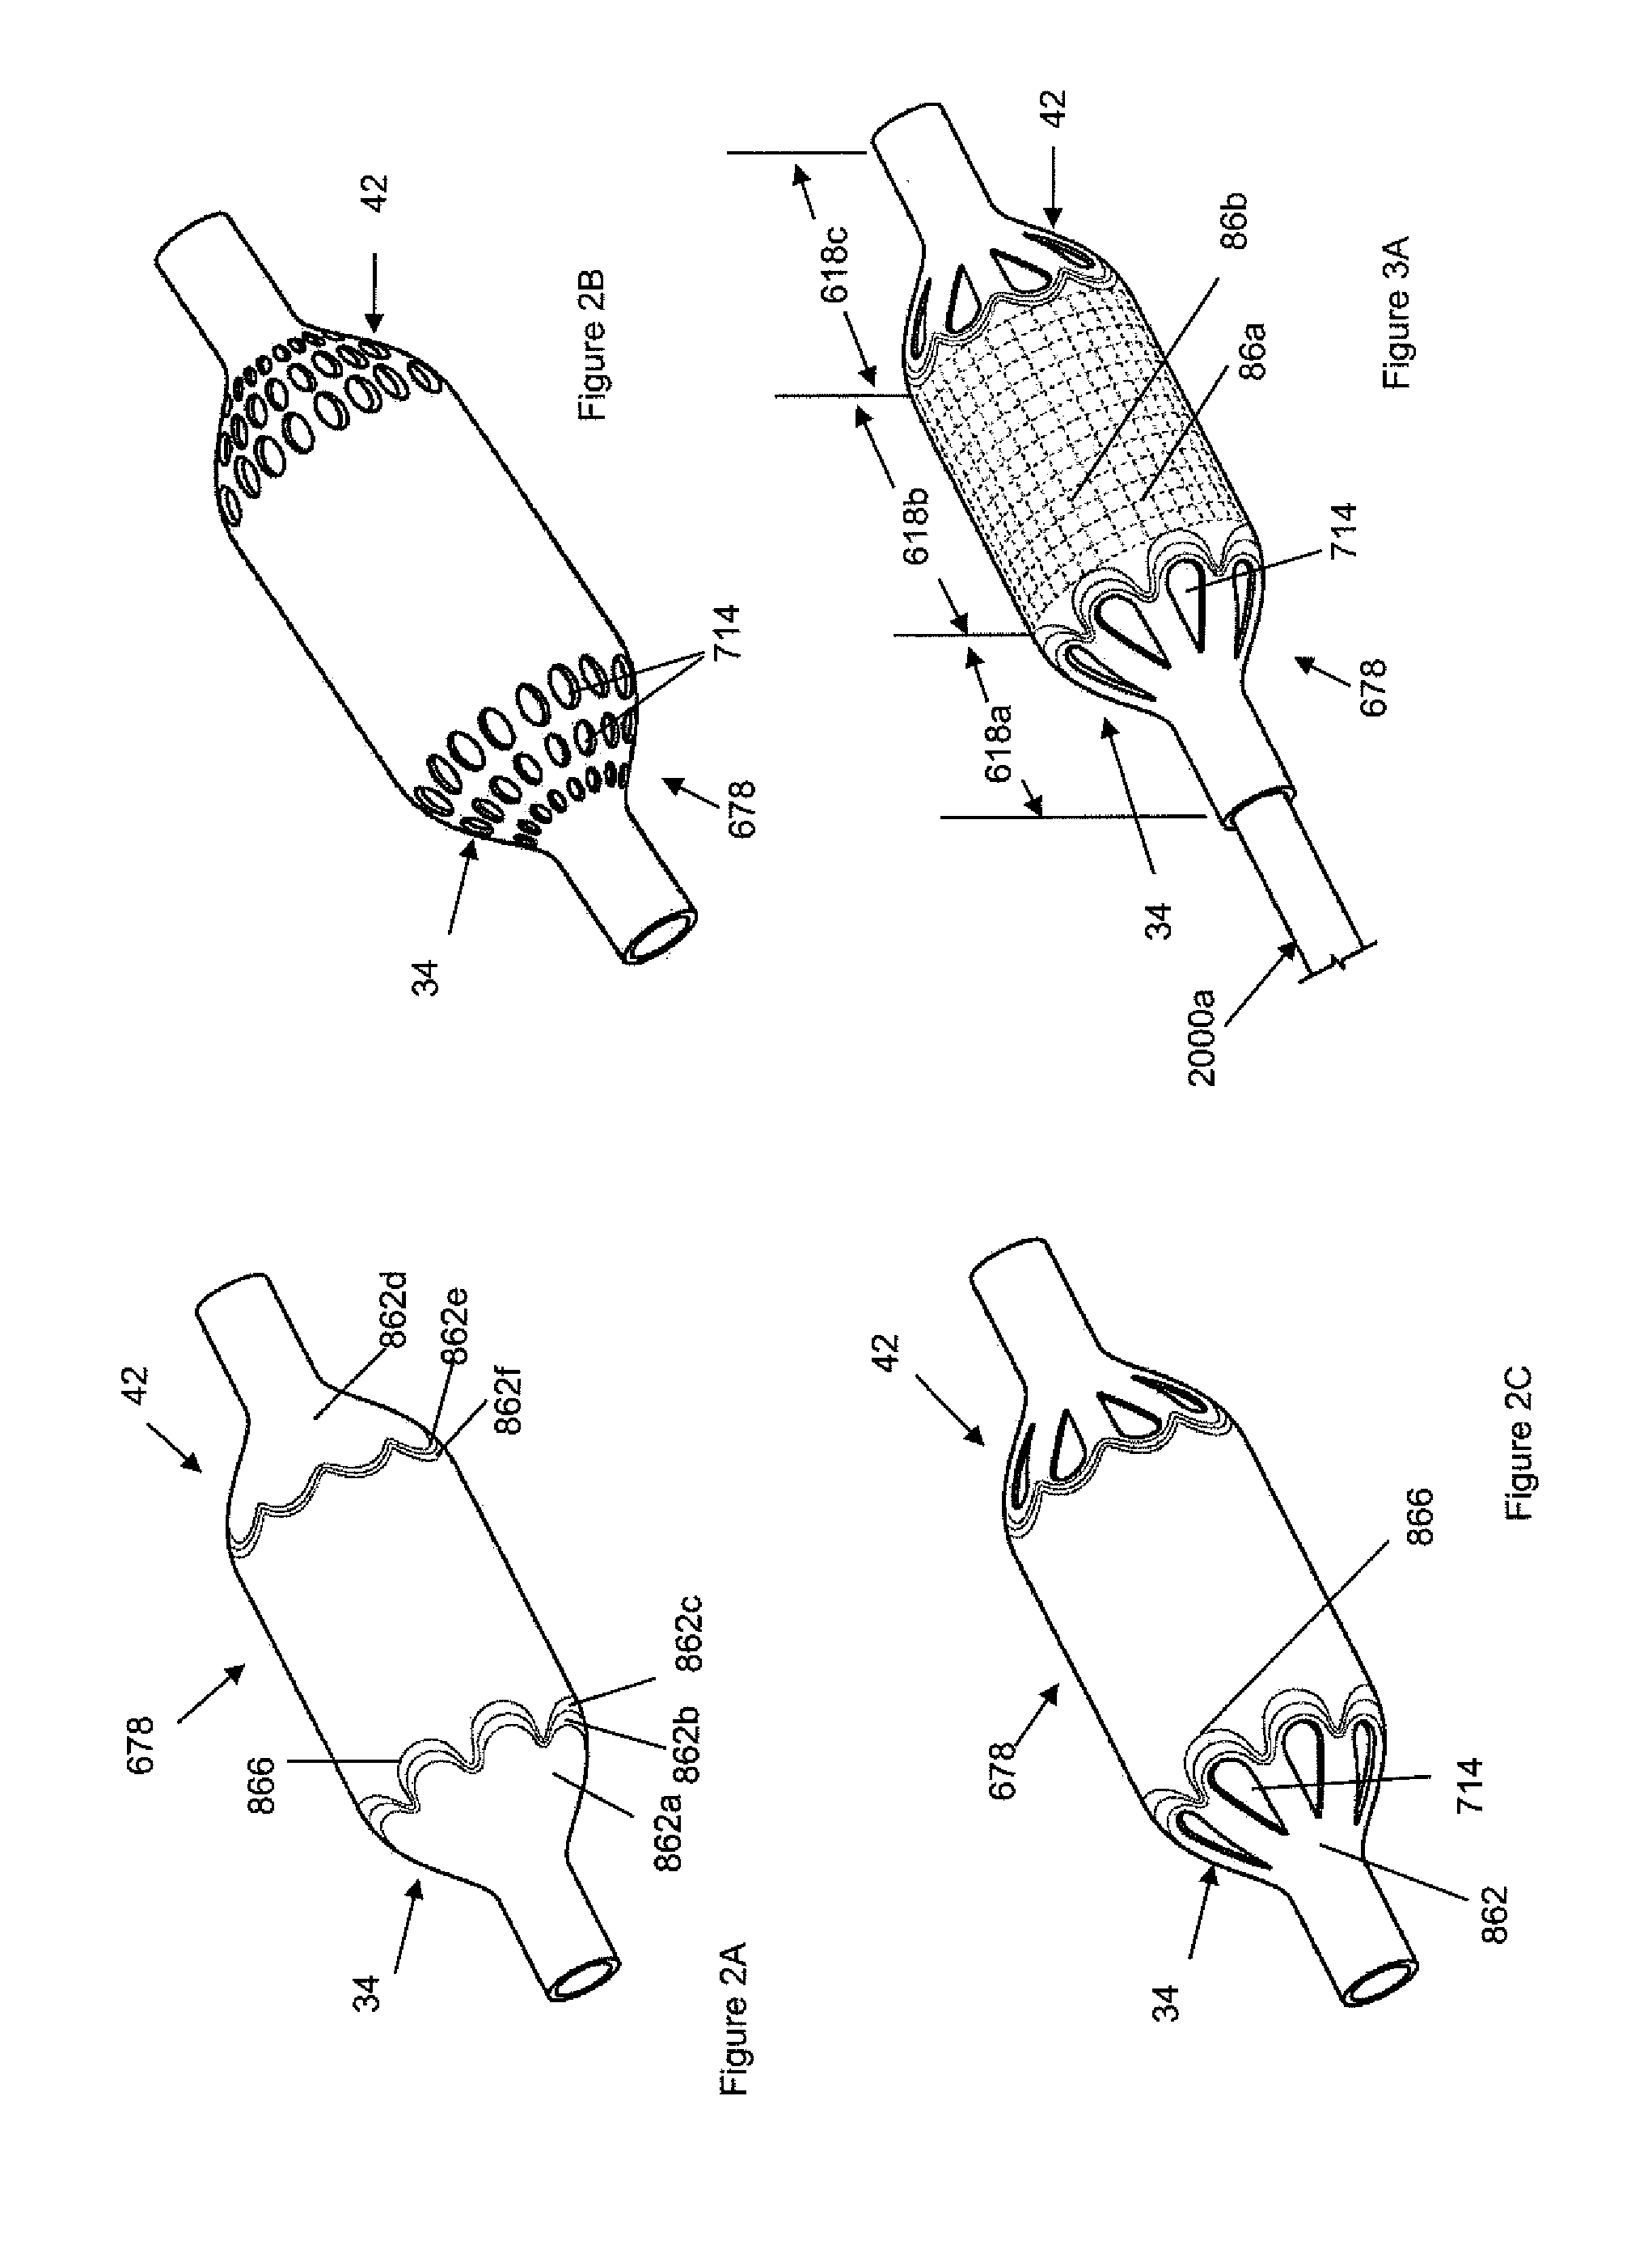 Reinforced inflatable medical devices